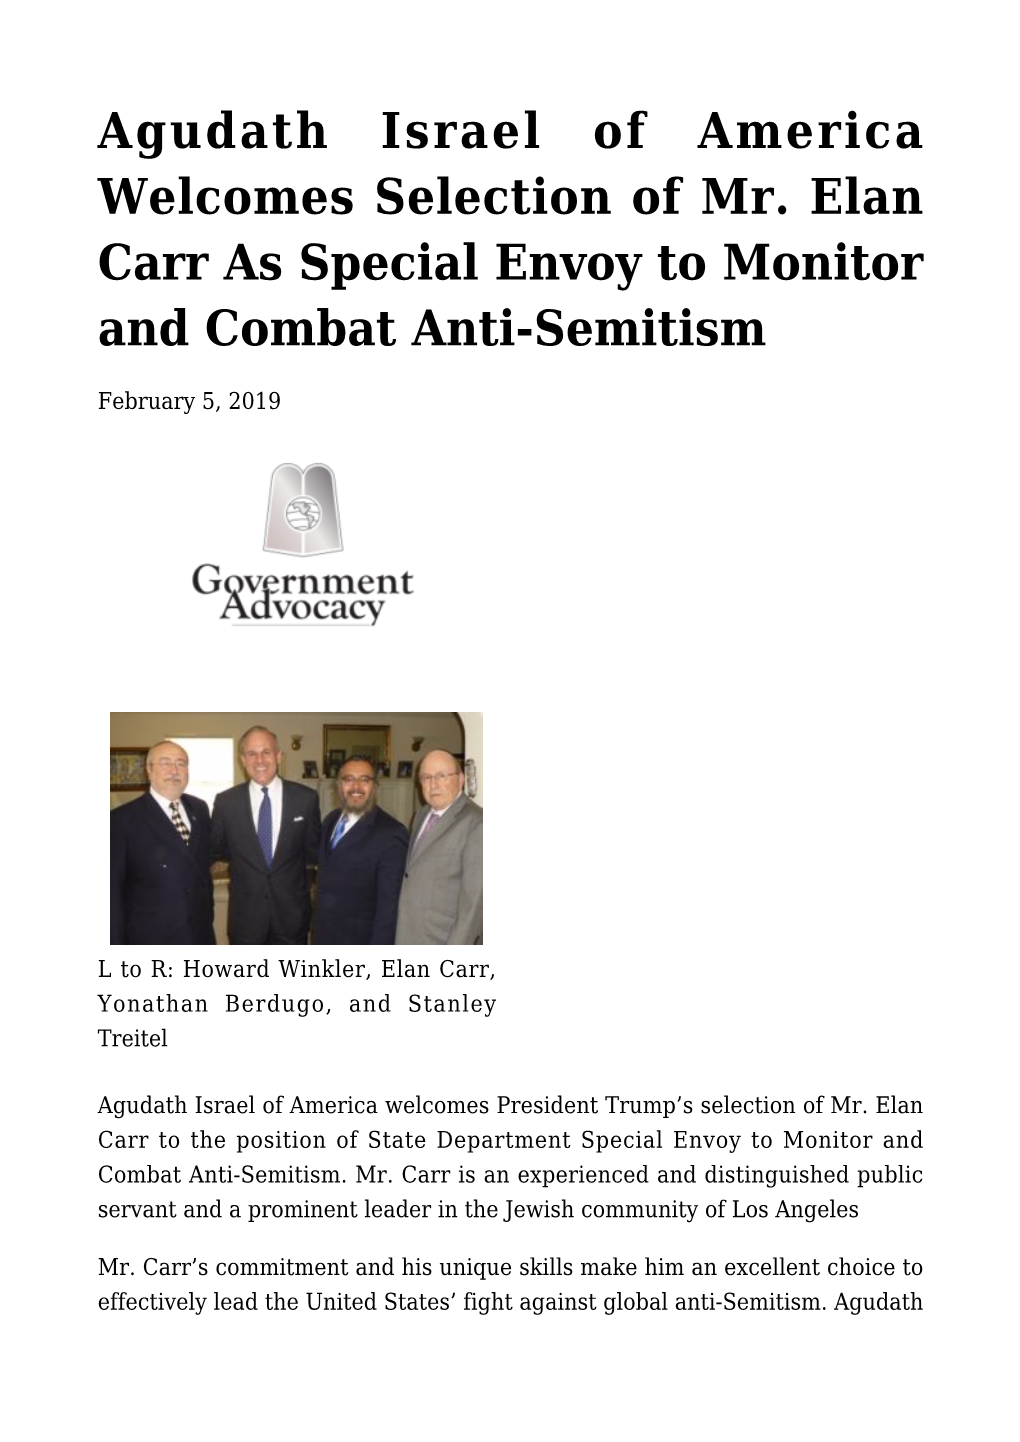 Agudath Israel of America Welcomes Selection of Mr. Elan Carr As Special Envoy to Monitor and Combat Anti-Semitism